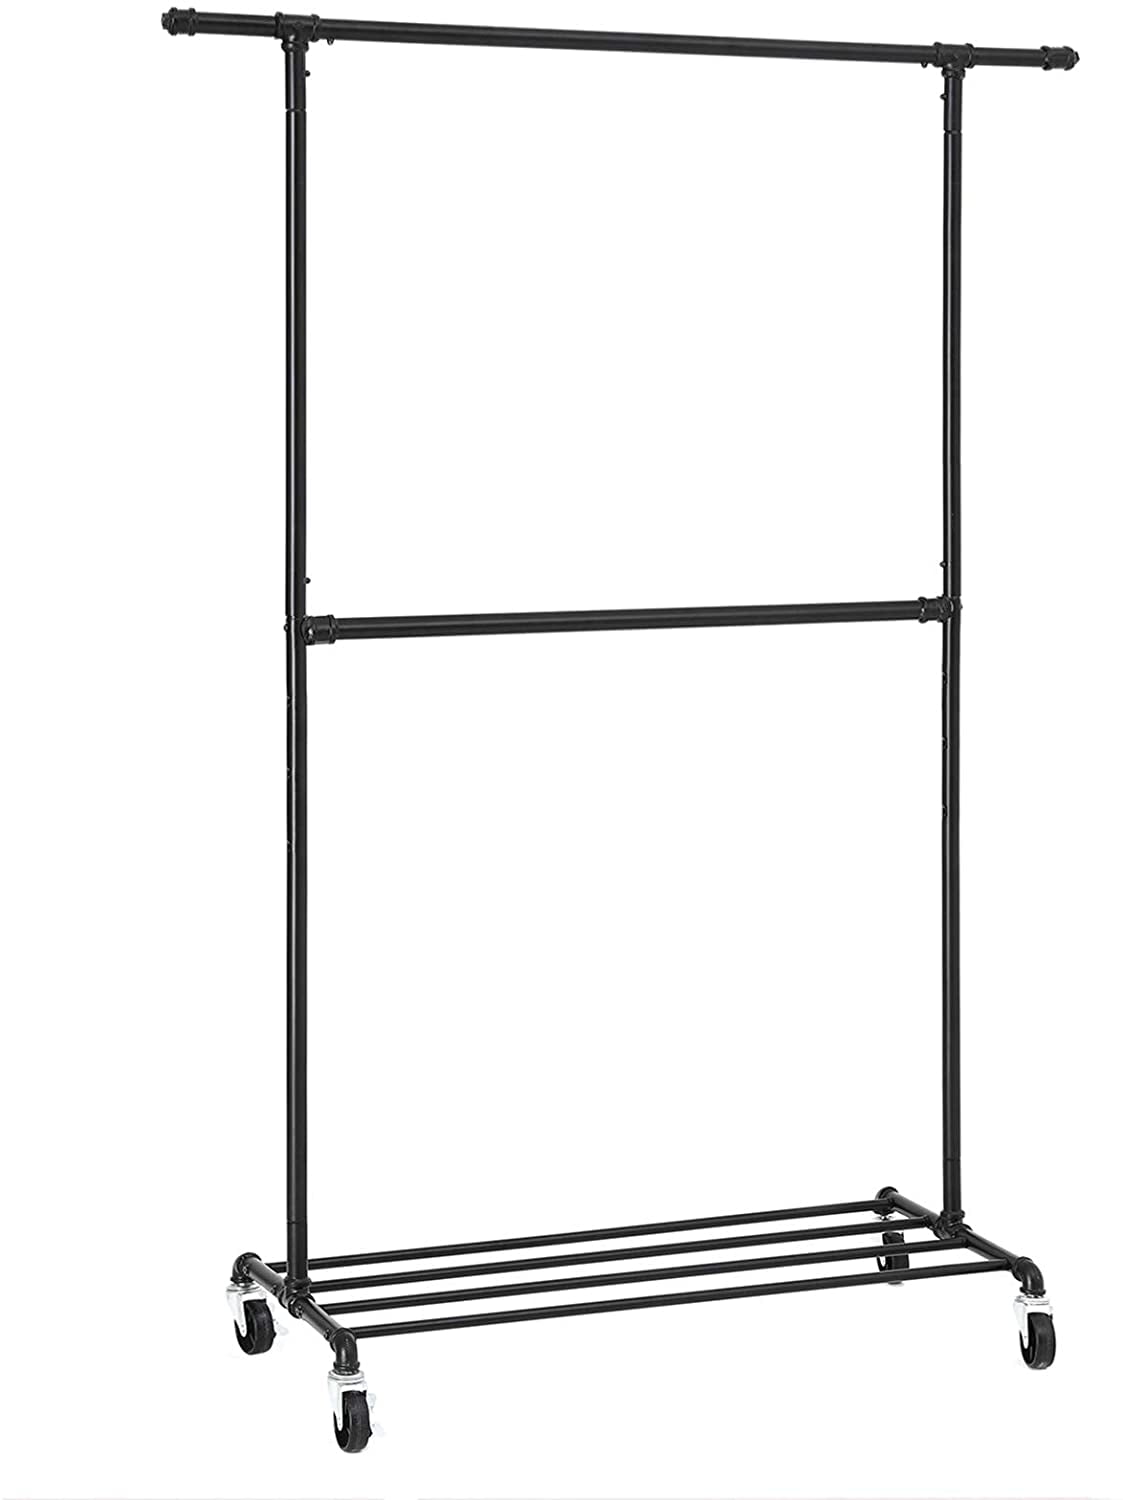 Shoe Rack Stainless Steel Zoternen Double Clothes Rail with Wheels and Adjustable Height